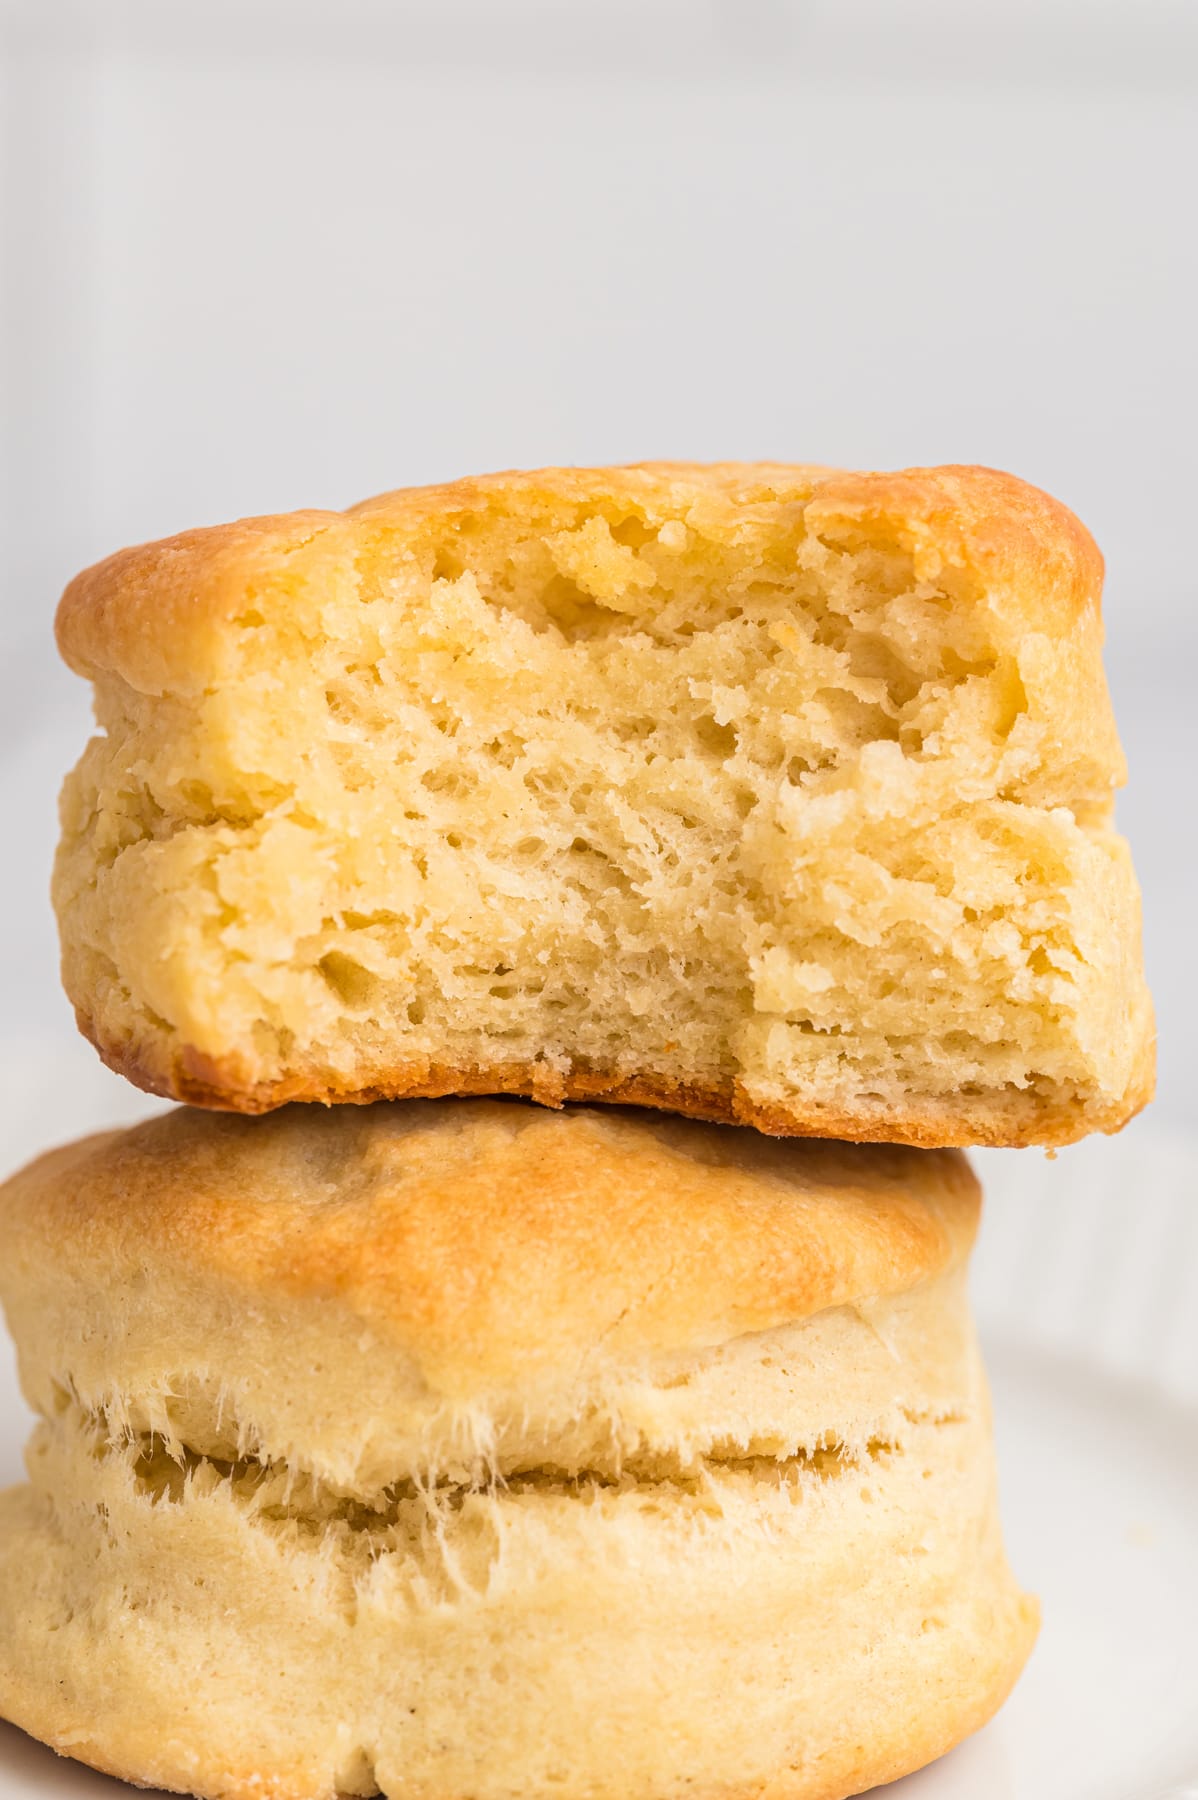 A stack of two biscuits, one with a bite missing ot show the fluffy insides